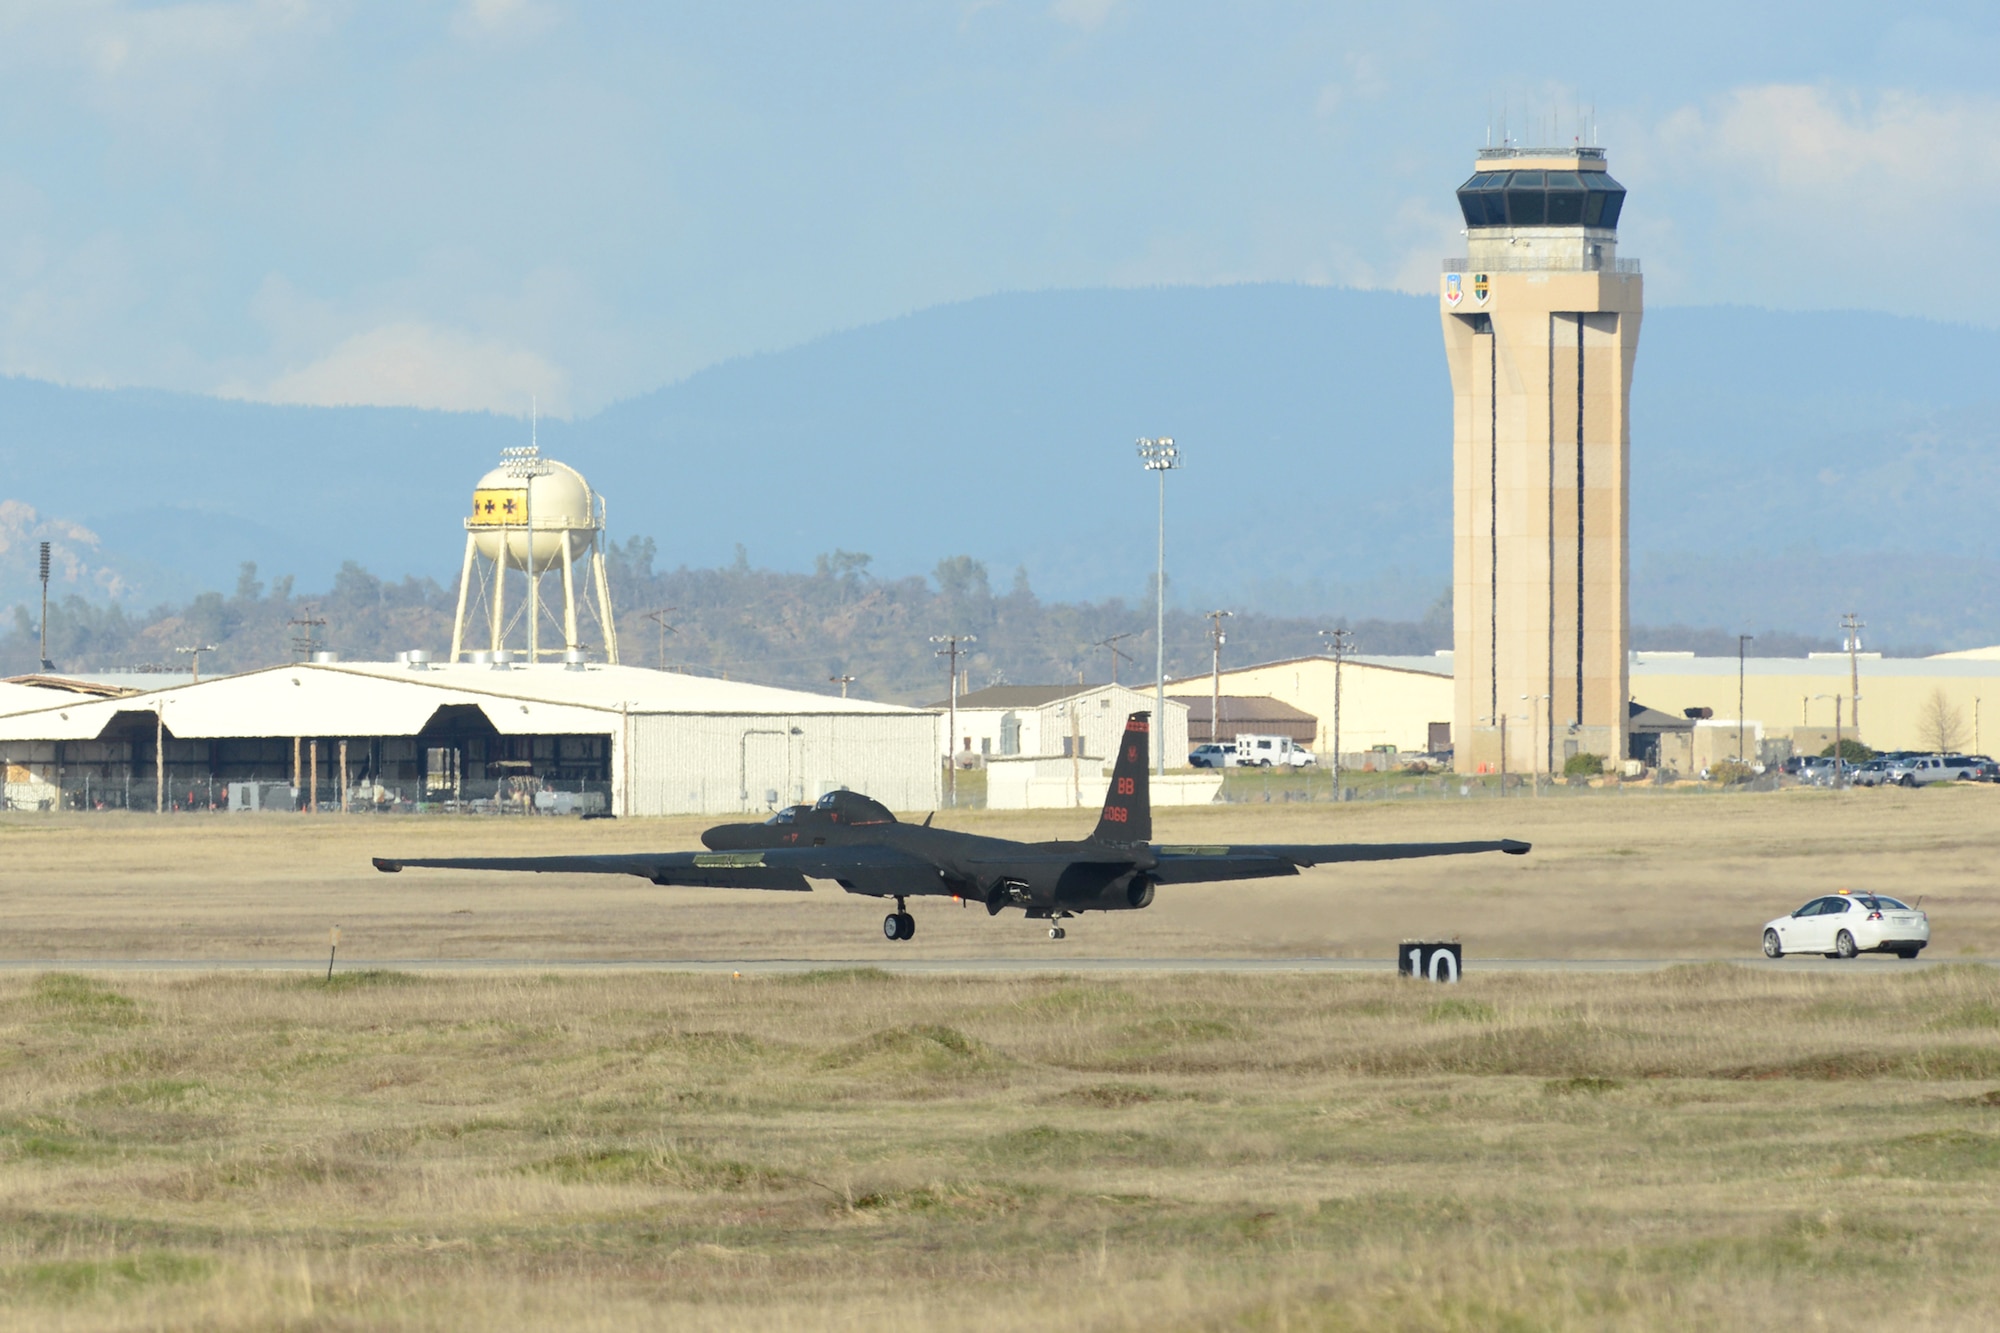 A U.S. Air Force U-2 Dragon Lady high-altitude reconnaissance aircraft lands at Beale Air Force Base, Calif., on Jan. 25, 2013, after flying a routine sortie over the local area. Sorties consist of flying patterns and running through touch and go exercises. (U.S. Air Force Photo by Mr. John Schwab/ Released)